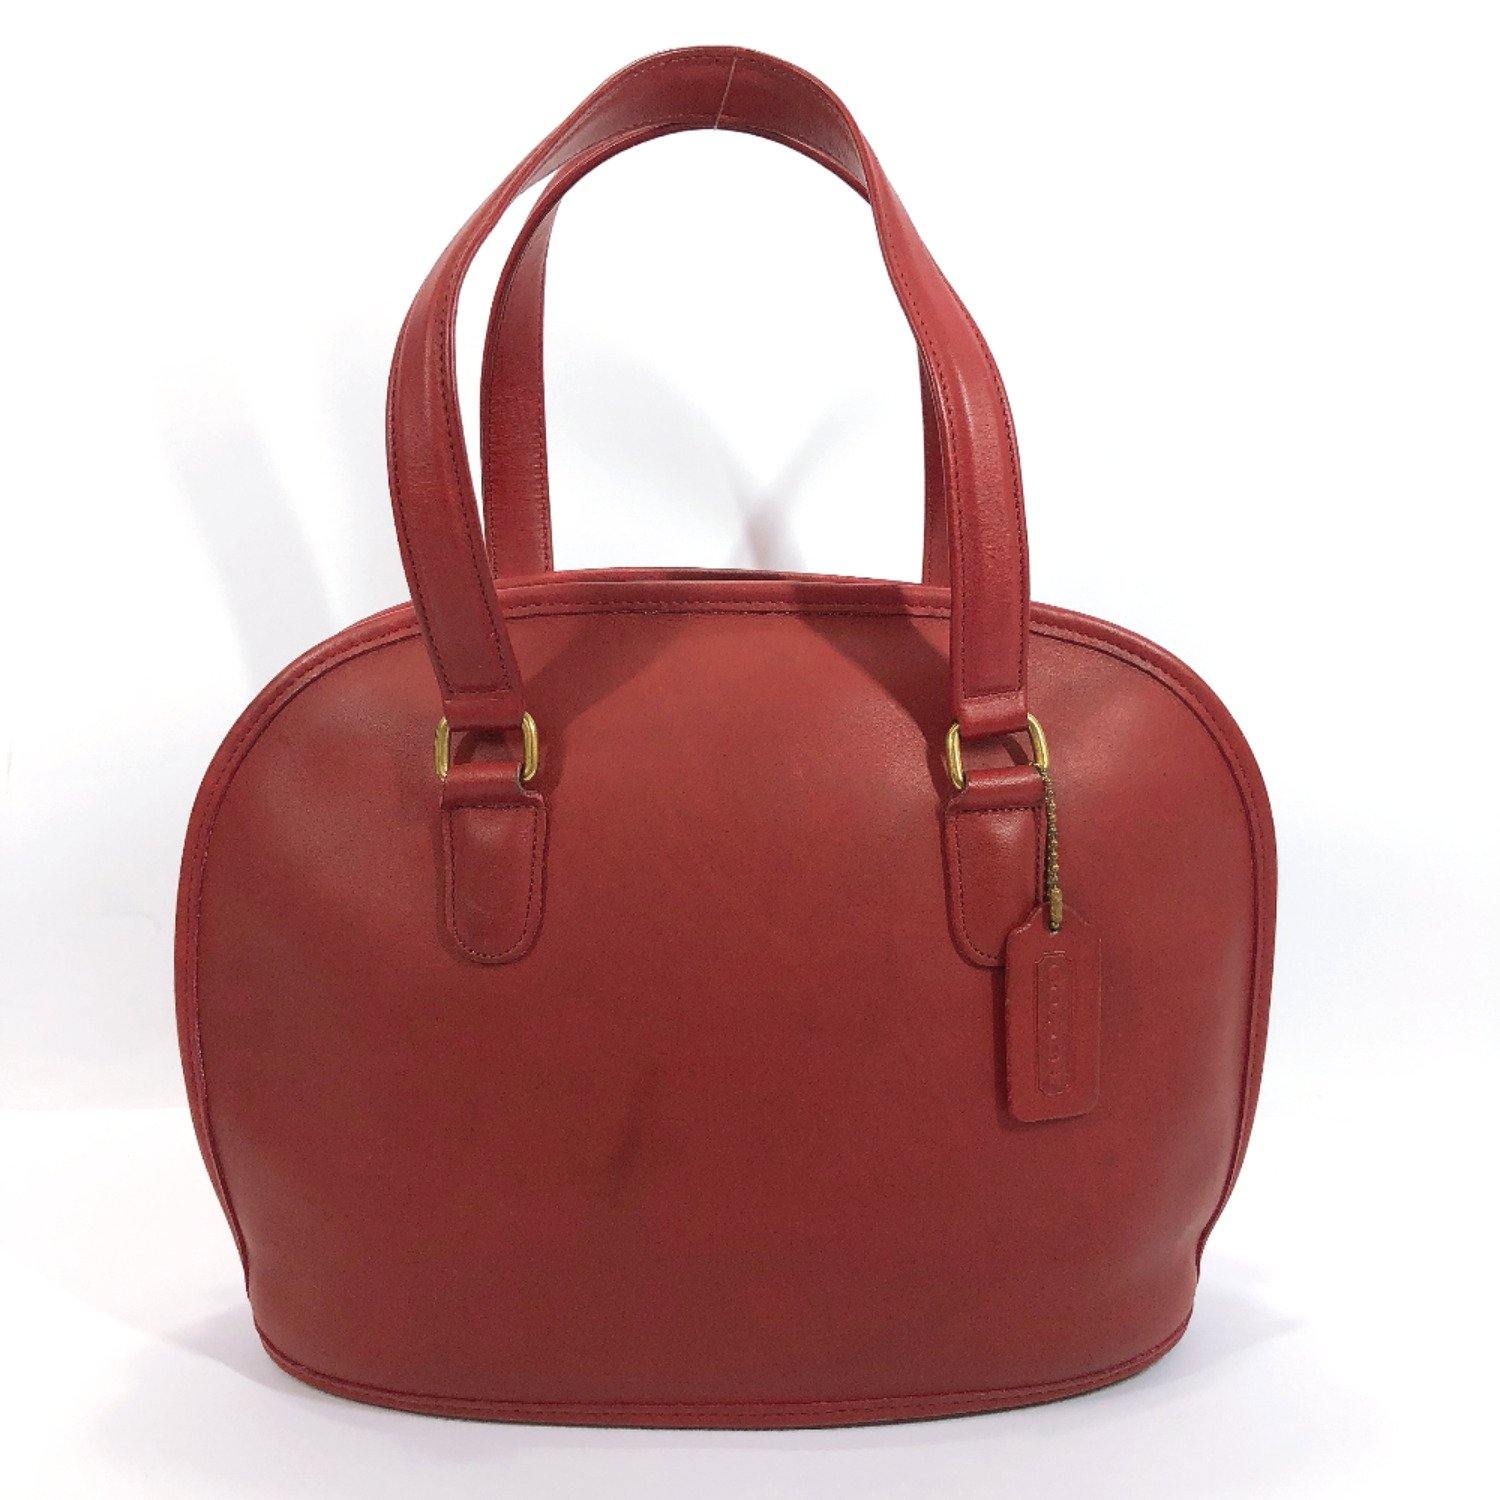 COACH Handbag Old coach leather Red Women Used